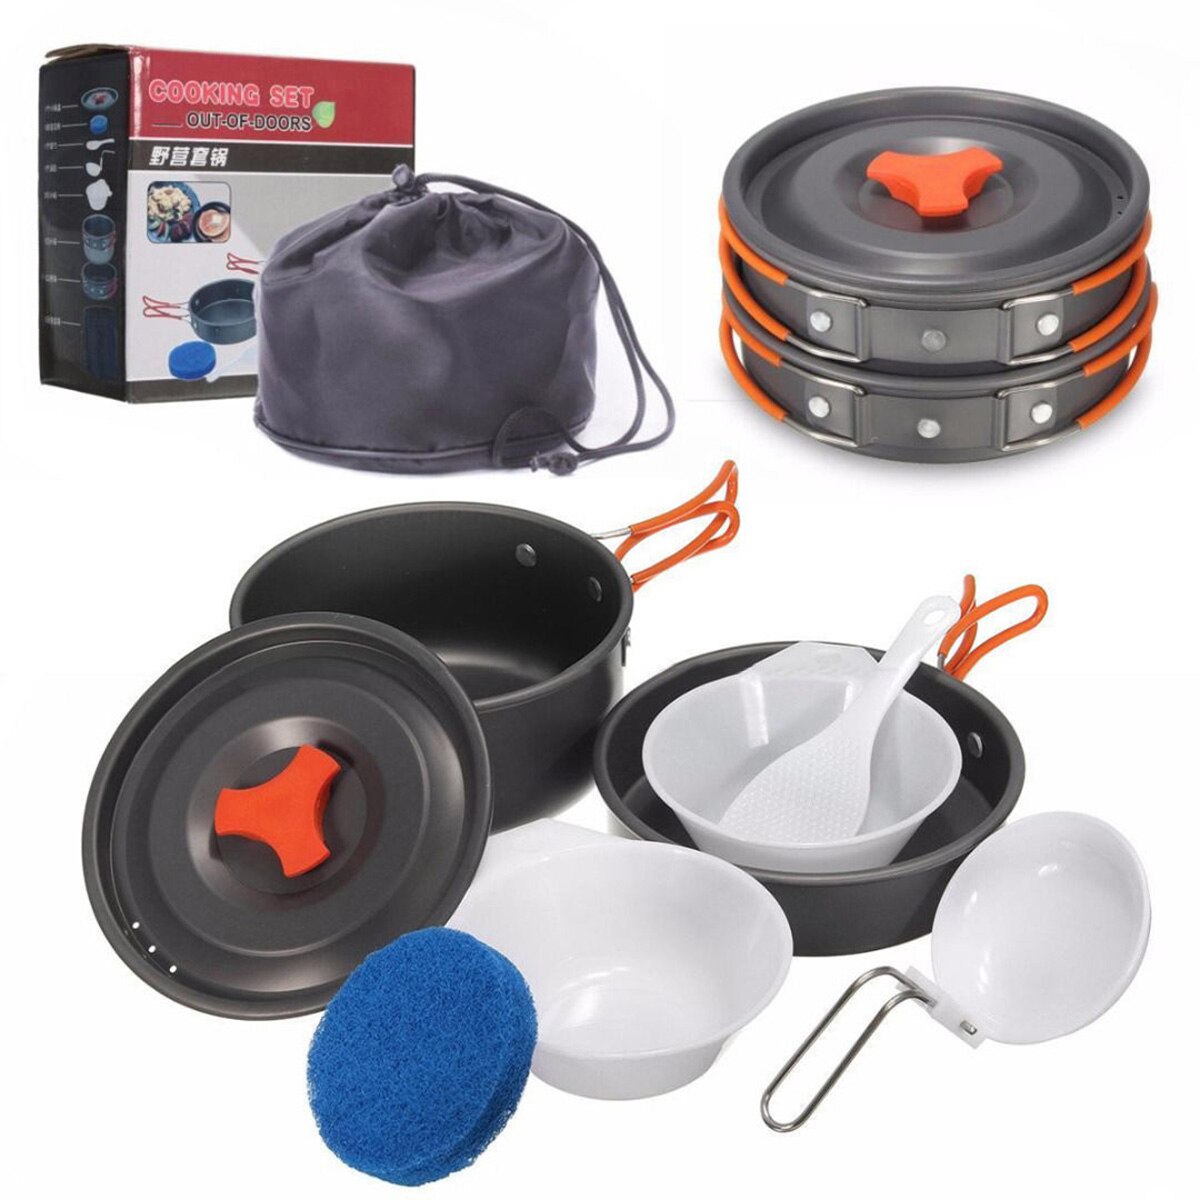 8Pcs/ Set Portable Outdoor Cooking Non-stick Pots Pans Portable Outdoor Camping Hiking Cooking Set Cookware travel tableware